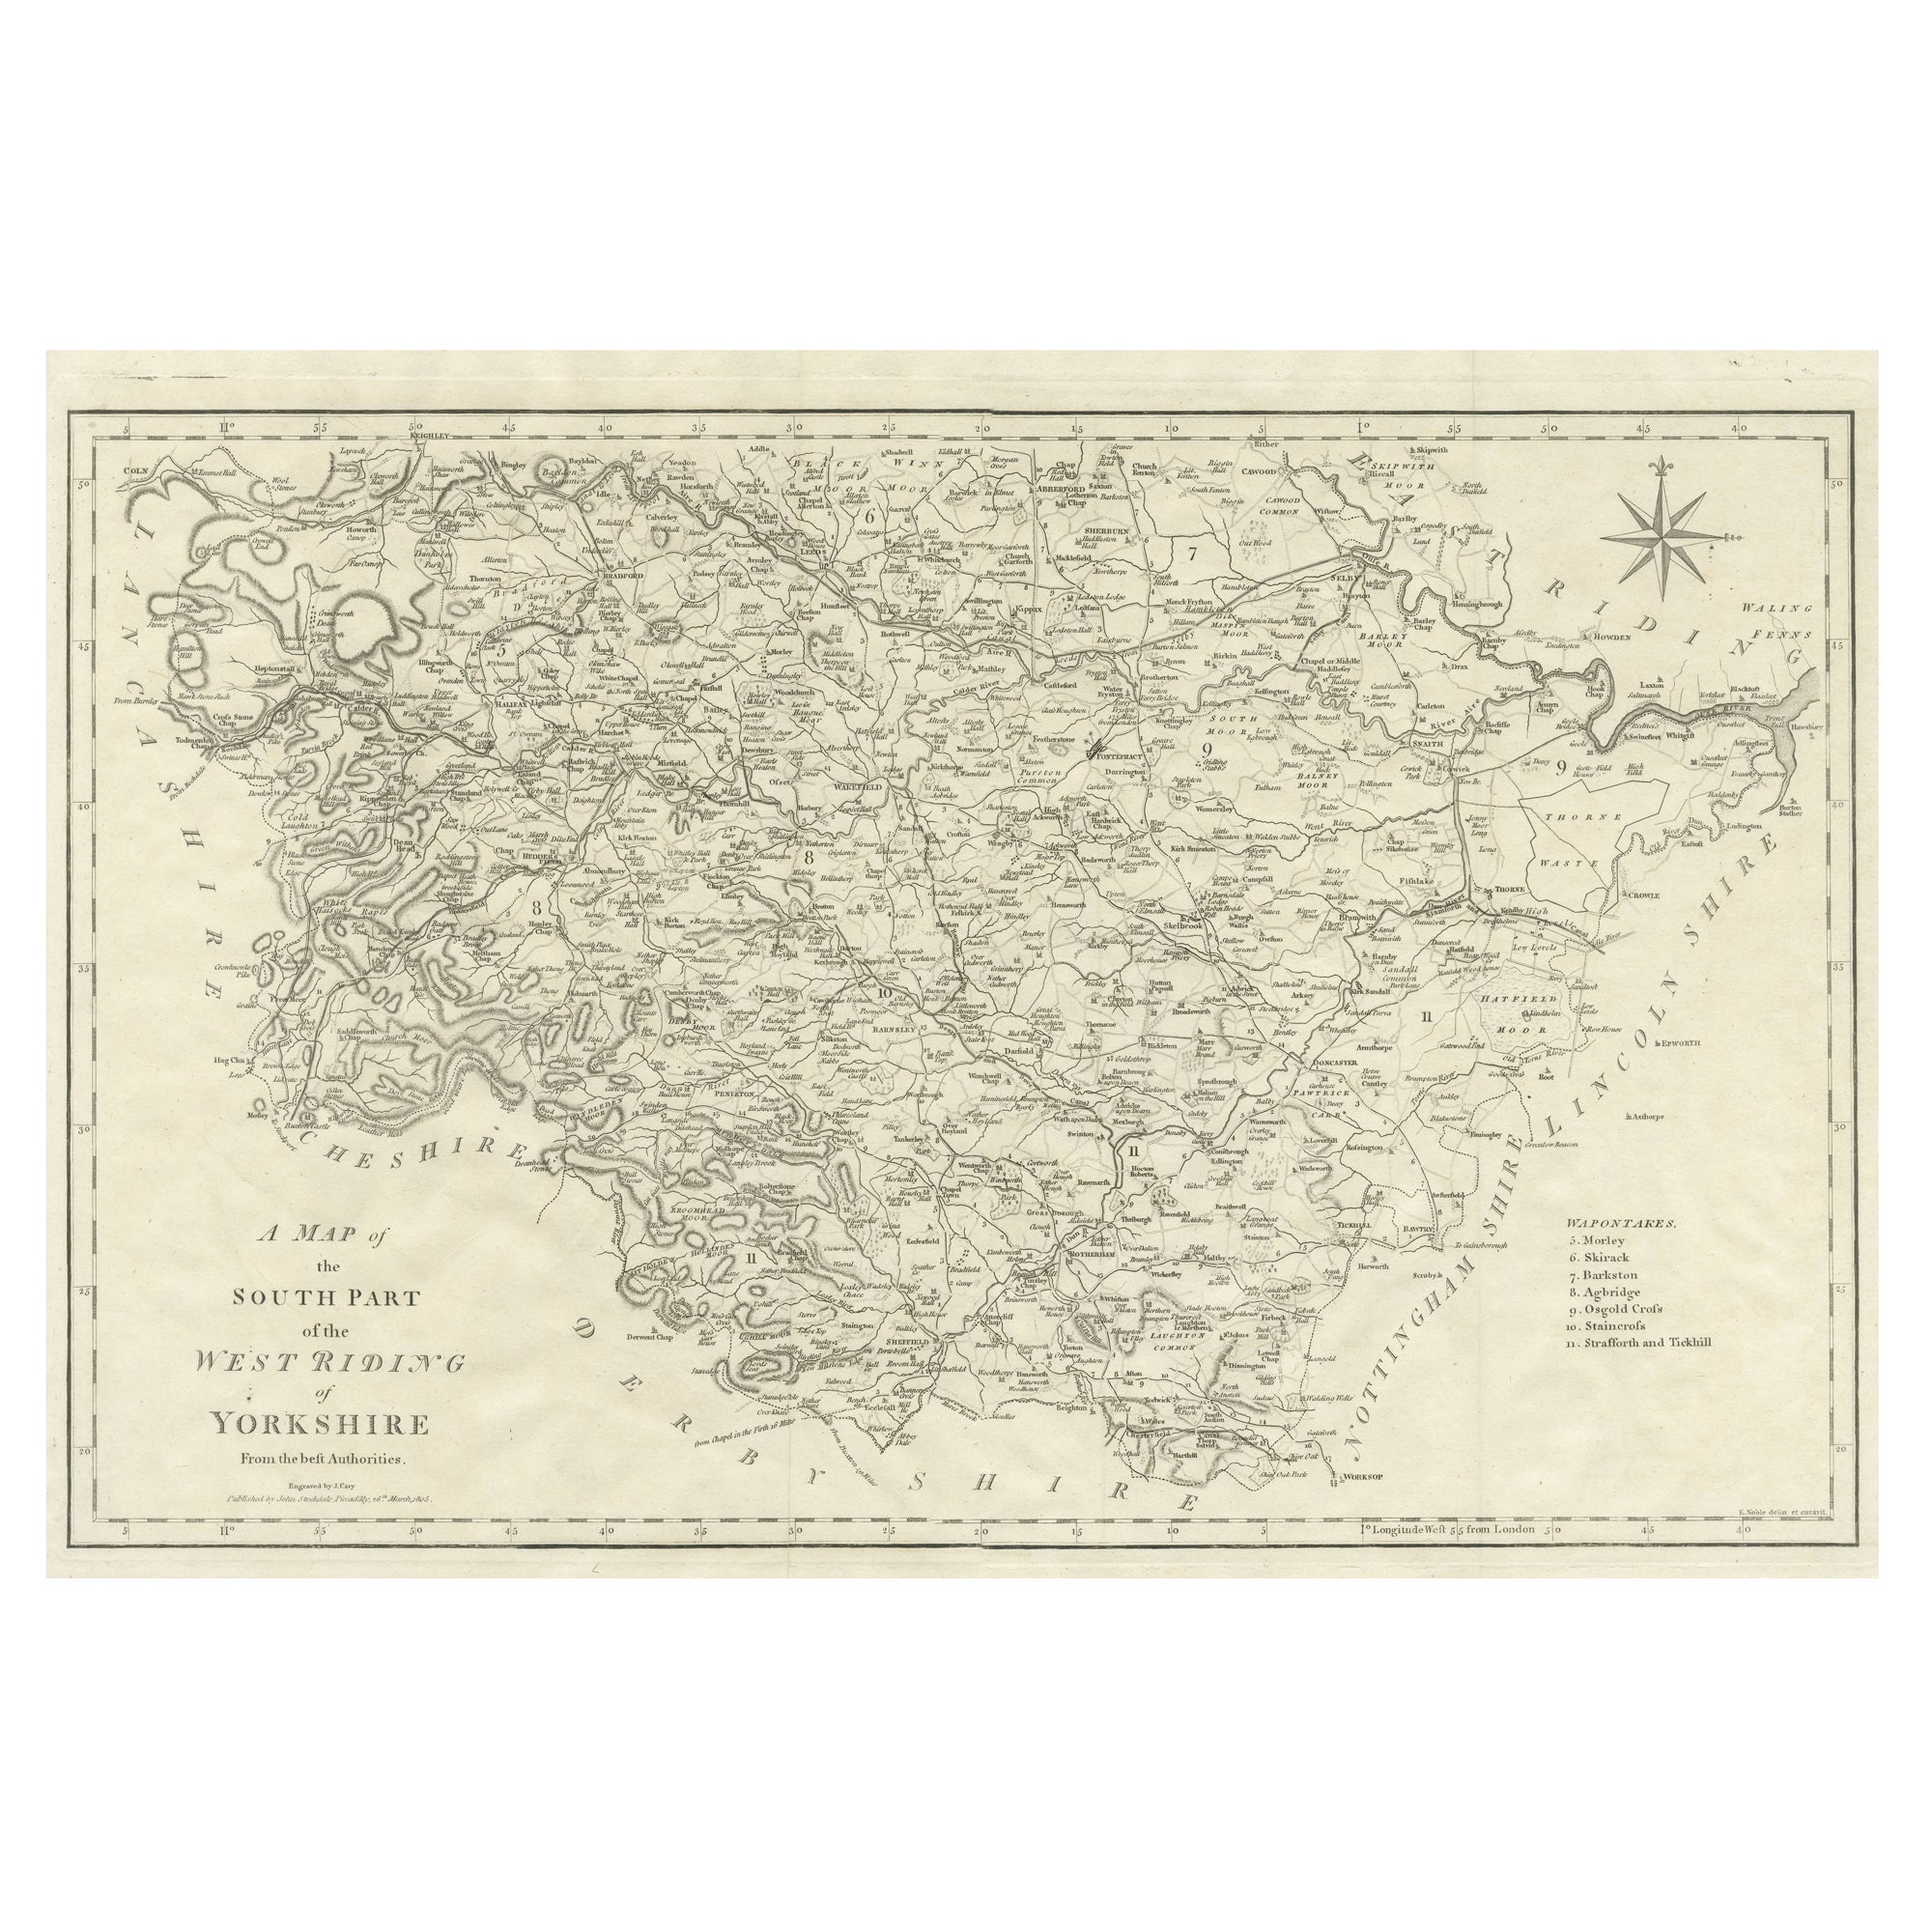 Large Antique County Map of the West Riding of Yorkshire 'South Part', England